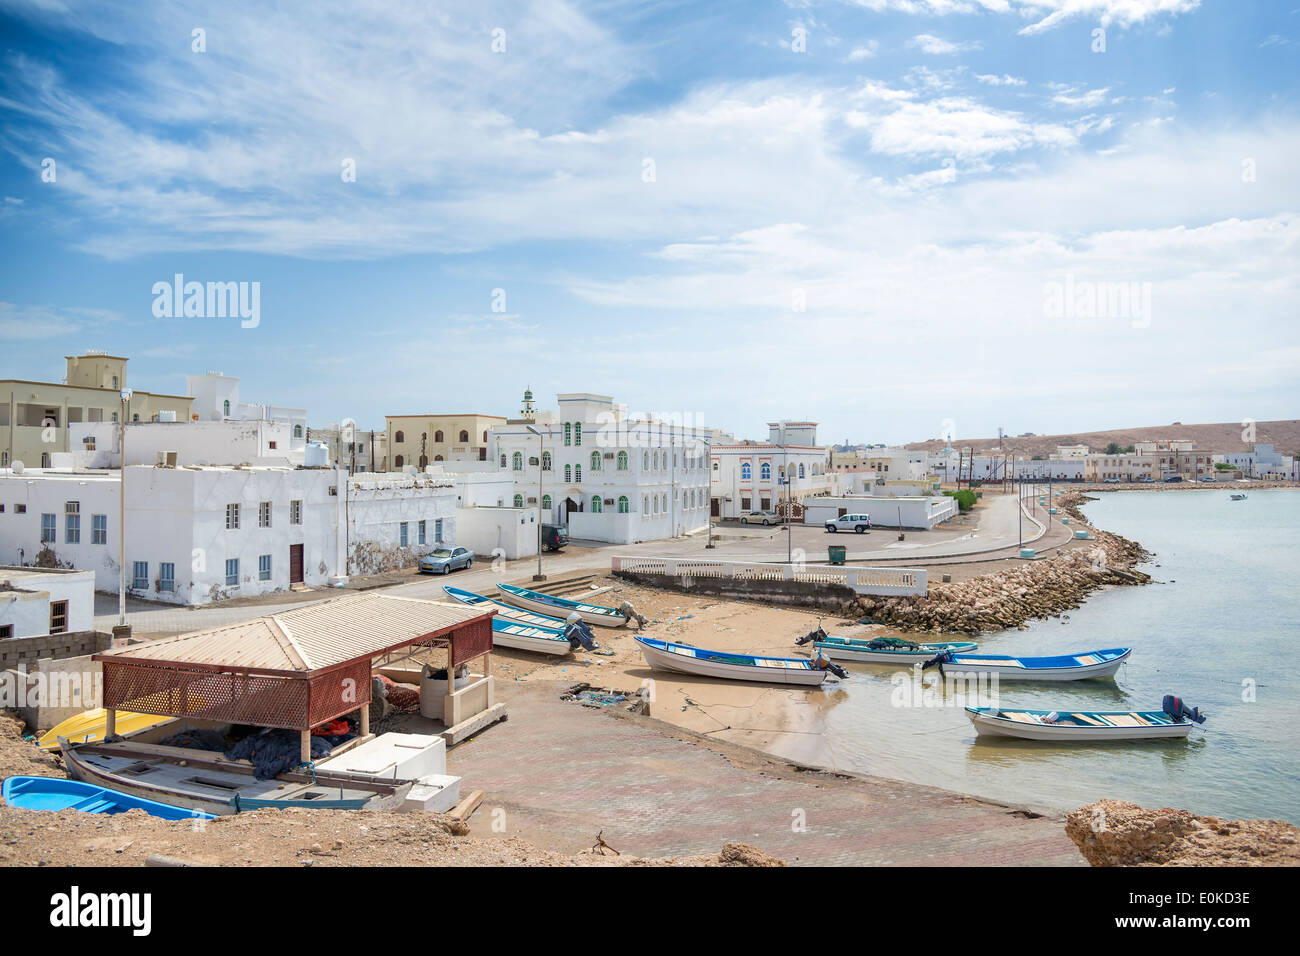 Image of a view to Sur harbor in Oman with sea, mountains, boats, houses and sky Stock Photo